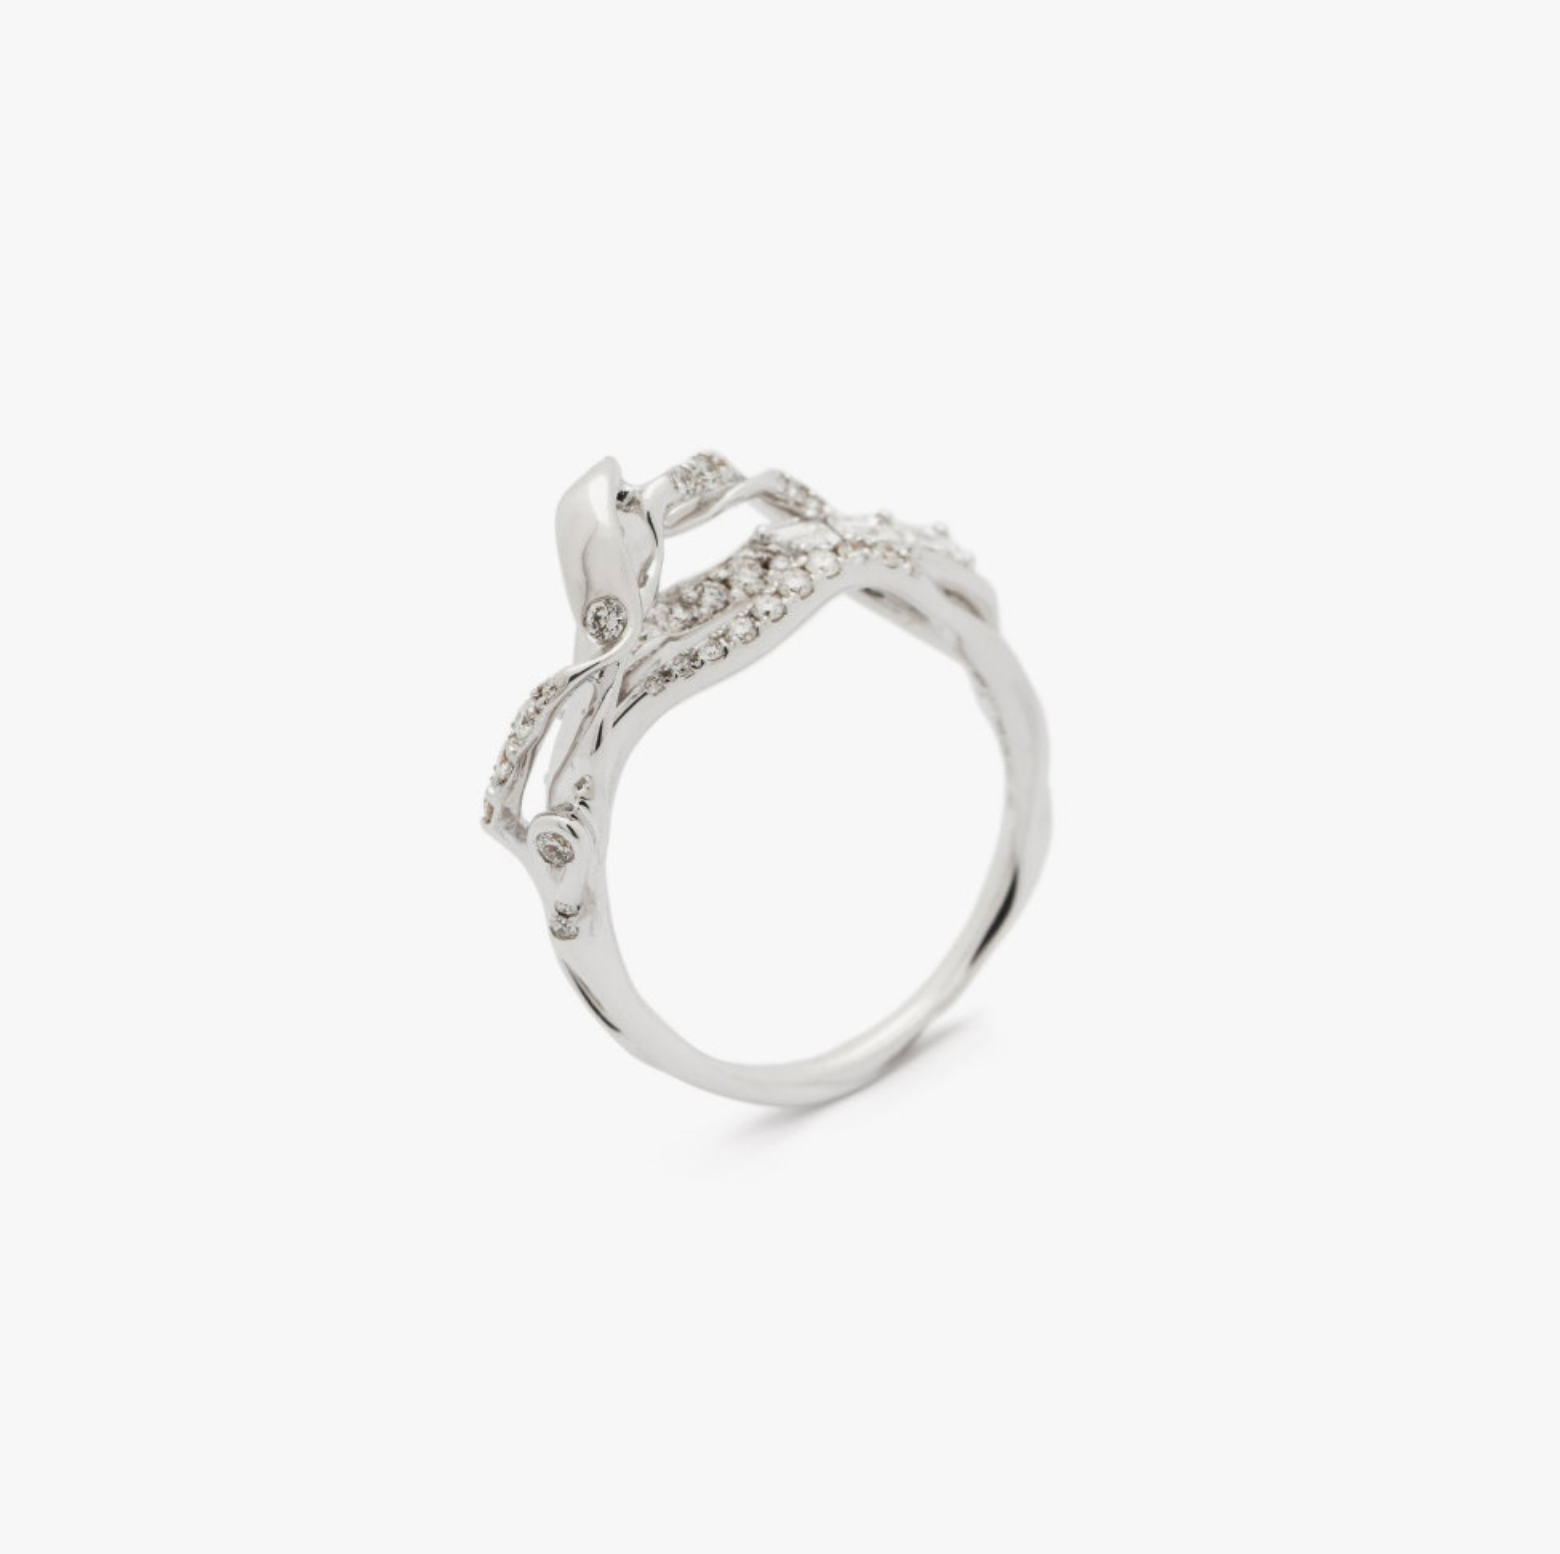 Exhale diamond stackable ring in white gold with diamonds